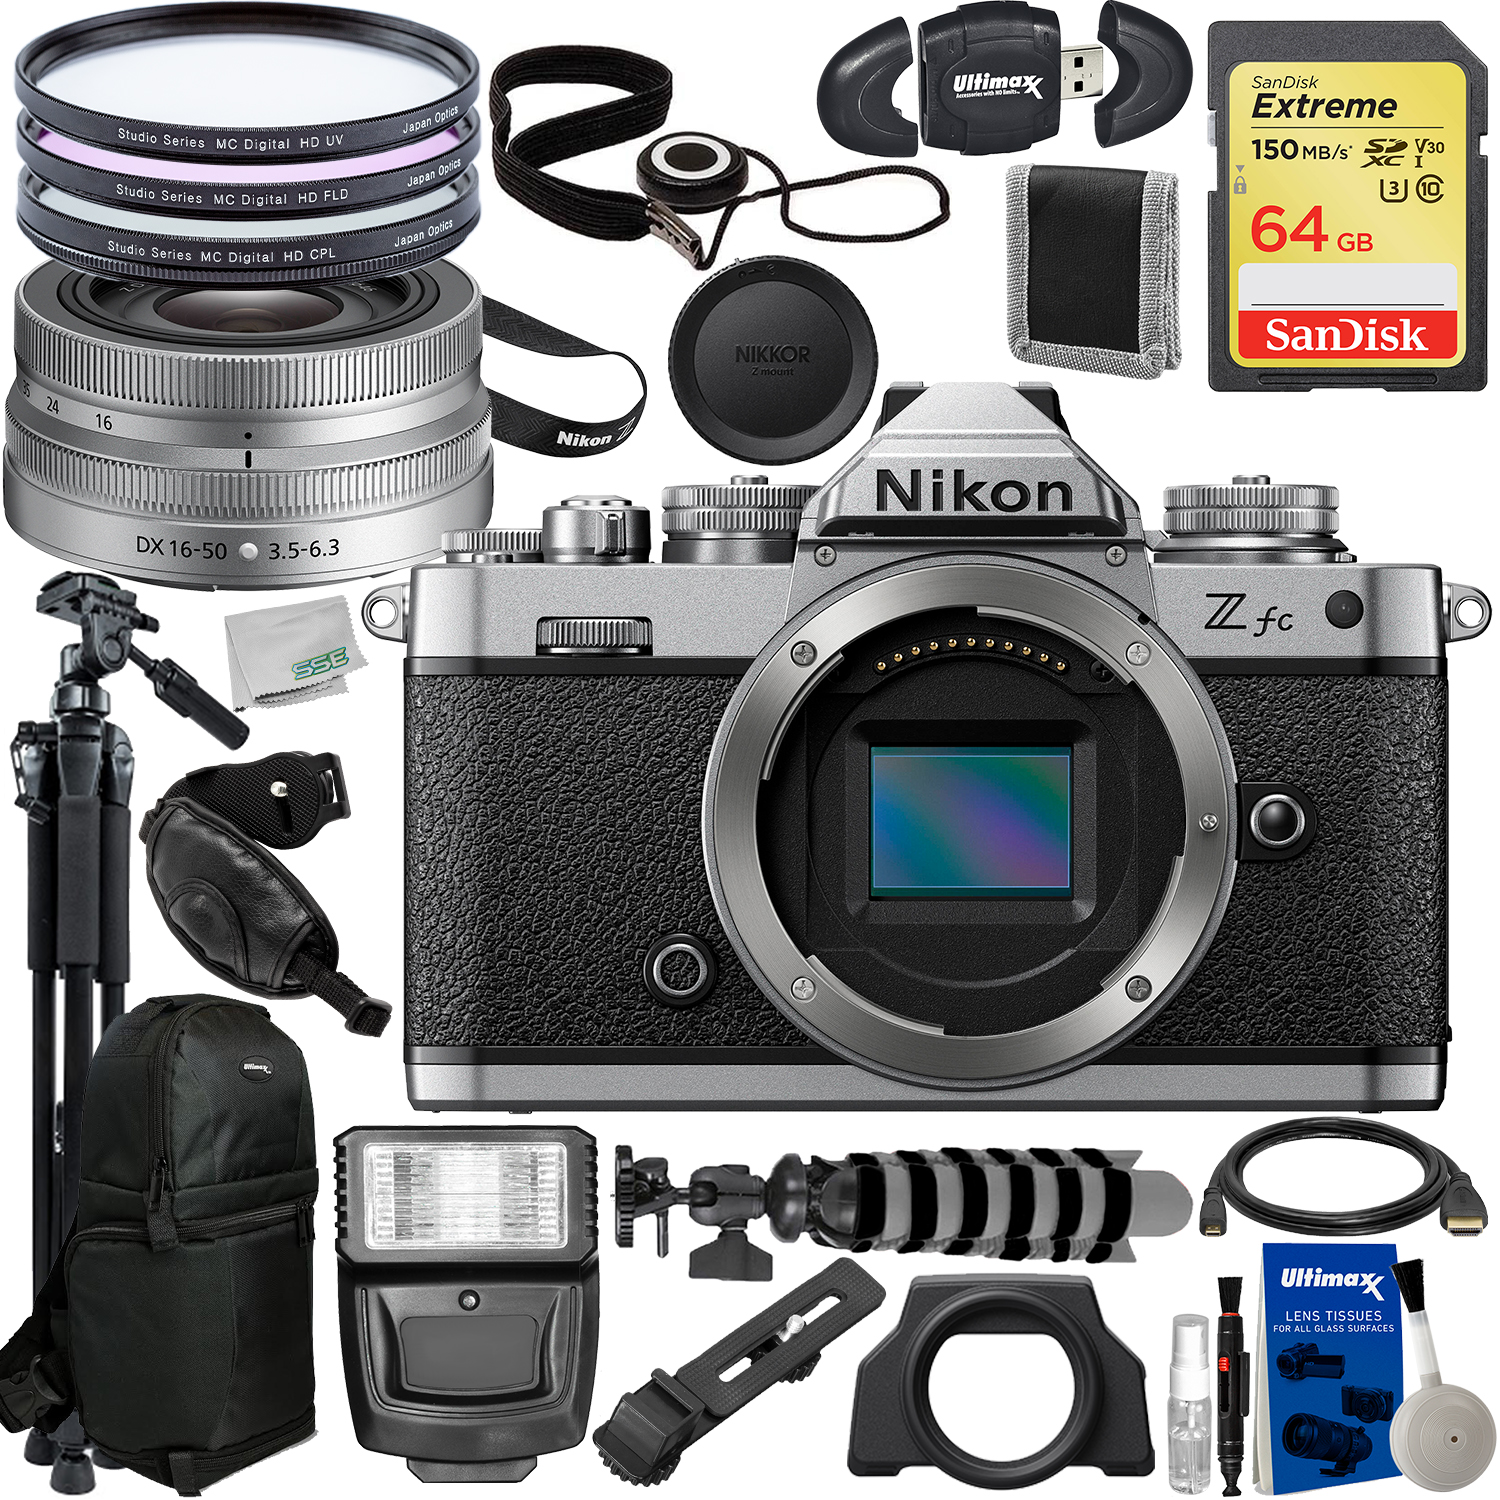 Nikon Zfc Mirrorless Camera with 16-50mm Lens and Essential Accessory Bundle: SanDisk 64GB Extreme SDXC, Sling Backpack, Digital Flash & Much More (26pc Bundle) - image 1 of 10